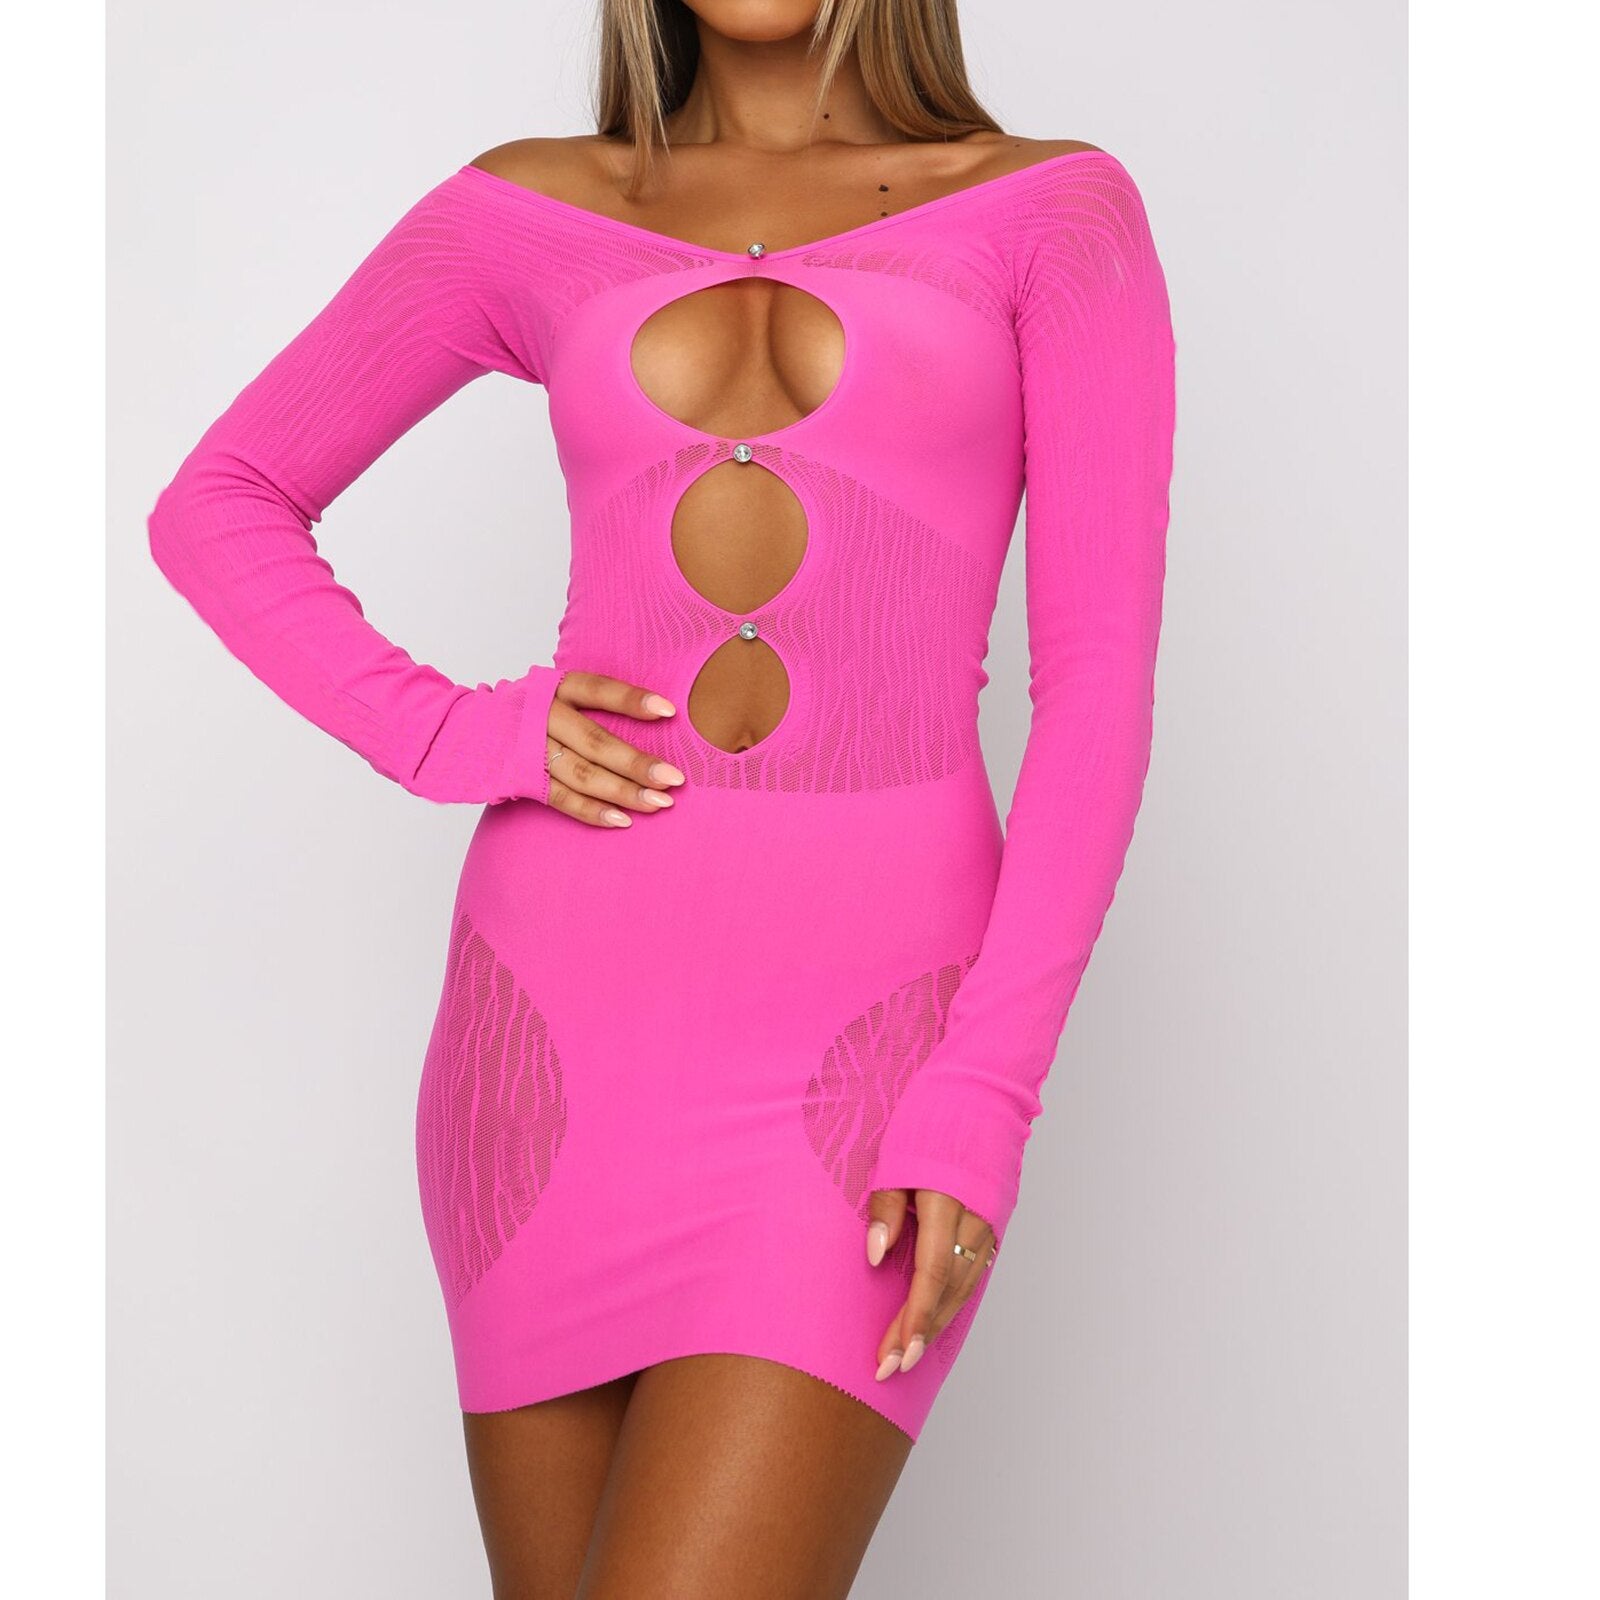 Cinessd  Women Sexy Hollow Out Off Shoulder Bodycon Mini Dress Long Sleeve Cutout Mesh Patchwork See Through Dress Clubwear